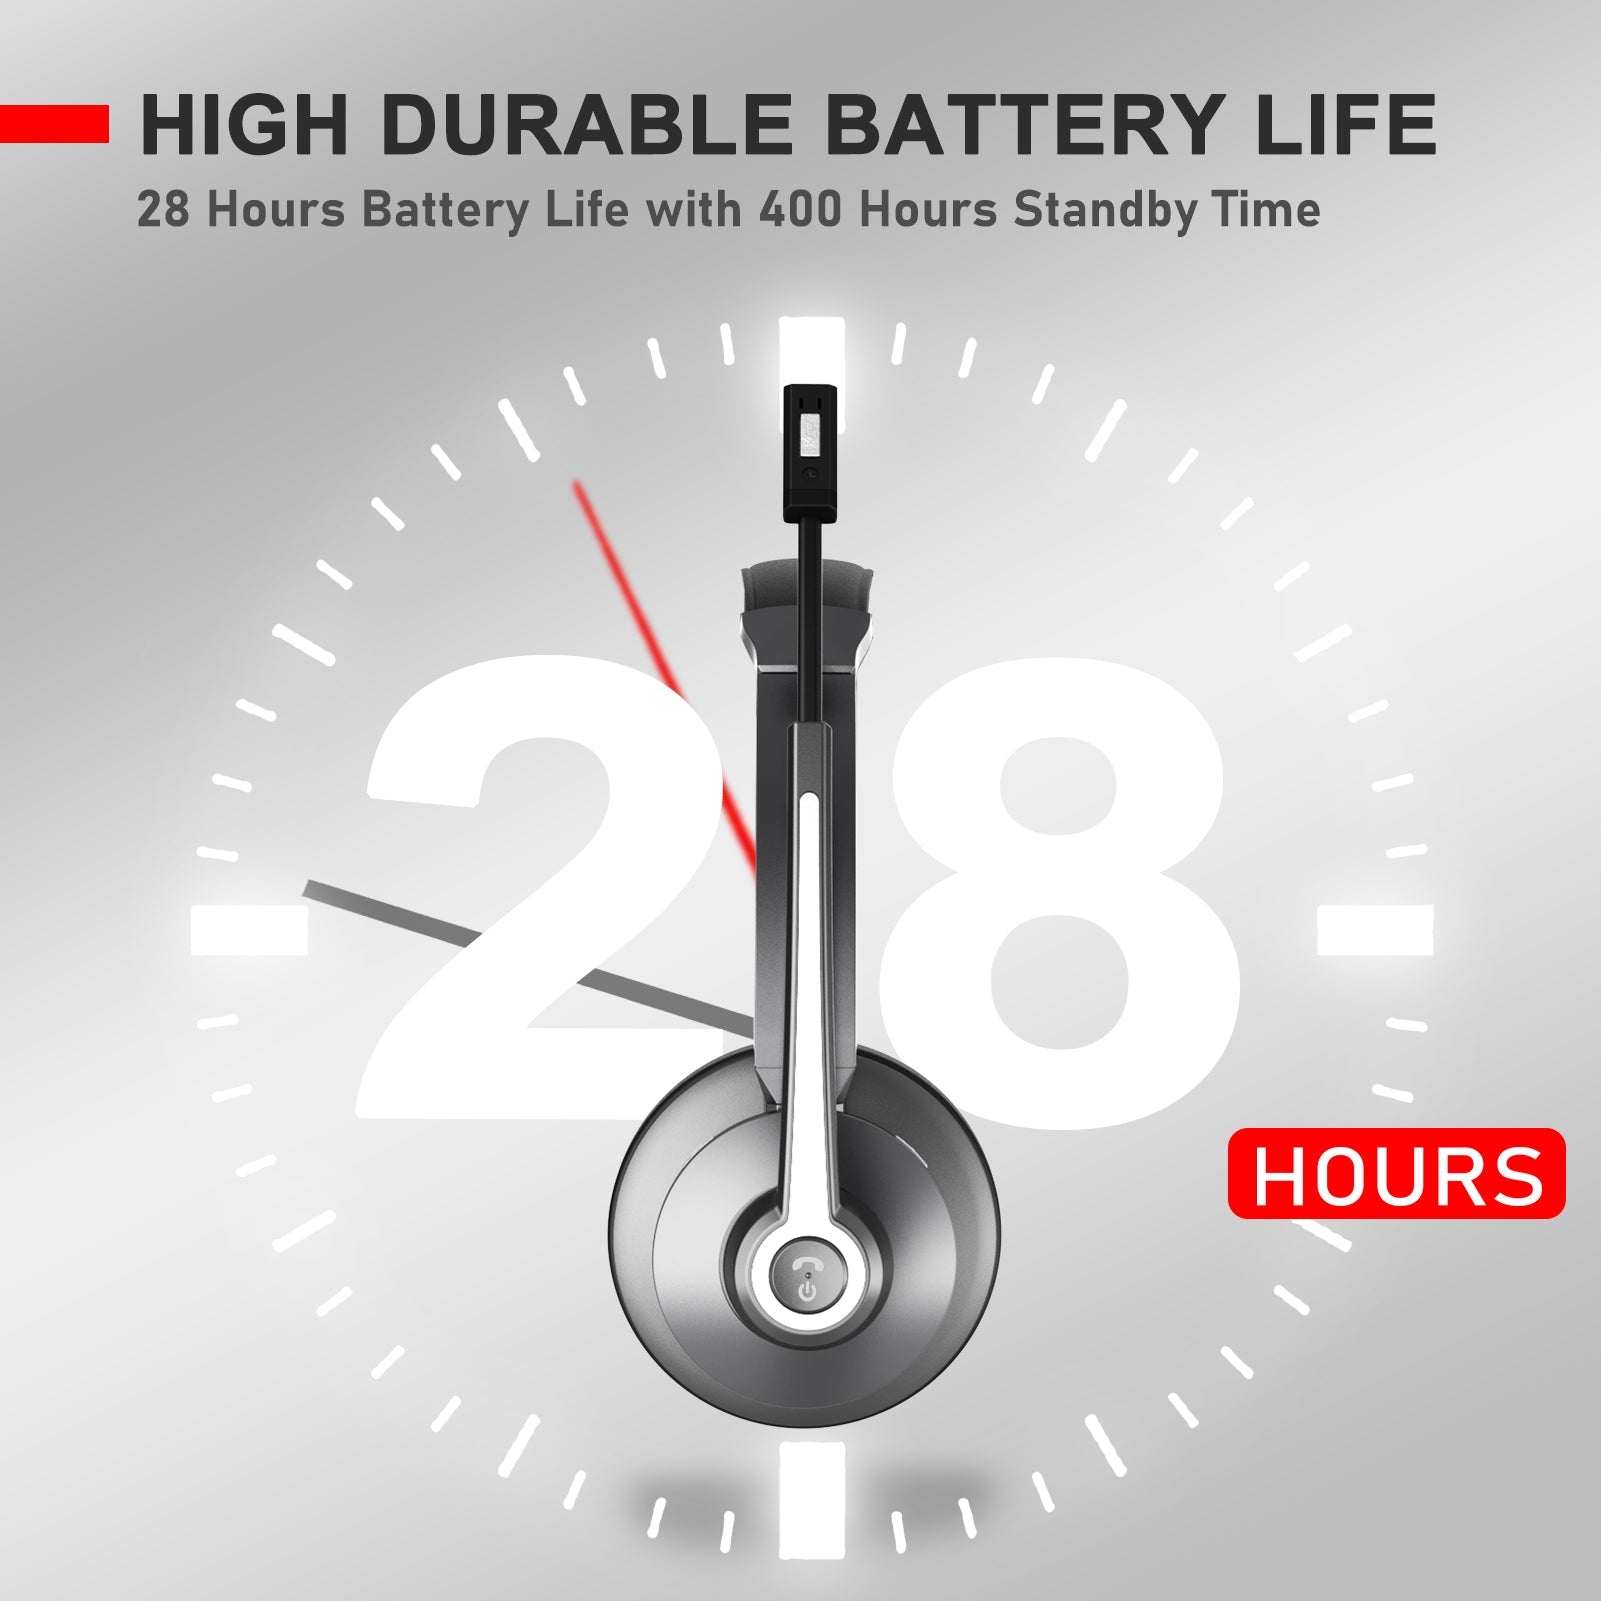 High durable battery life,28 Hours battert life with 400 hours standby time.